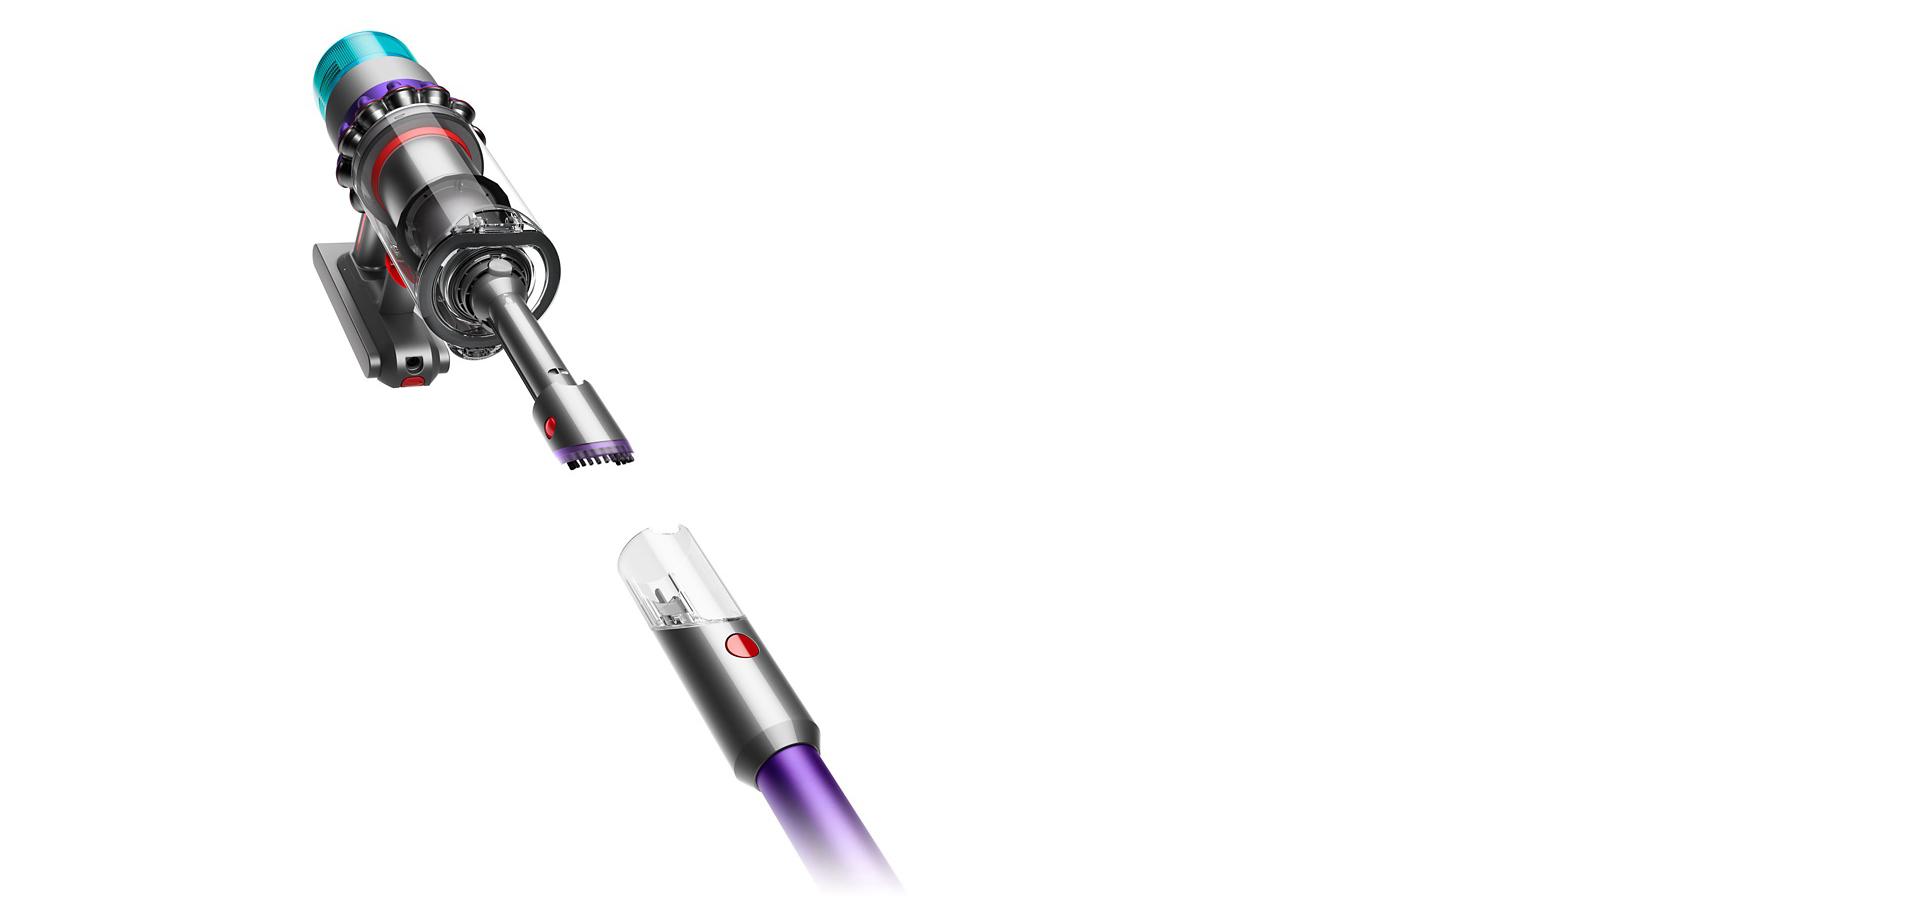 Dyson Gen5detect vacuum with Built-in dusting and crevice tool.